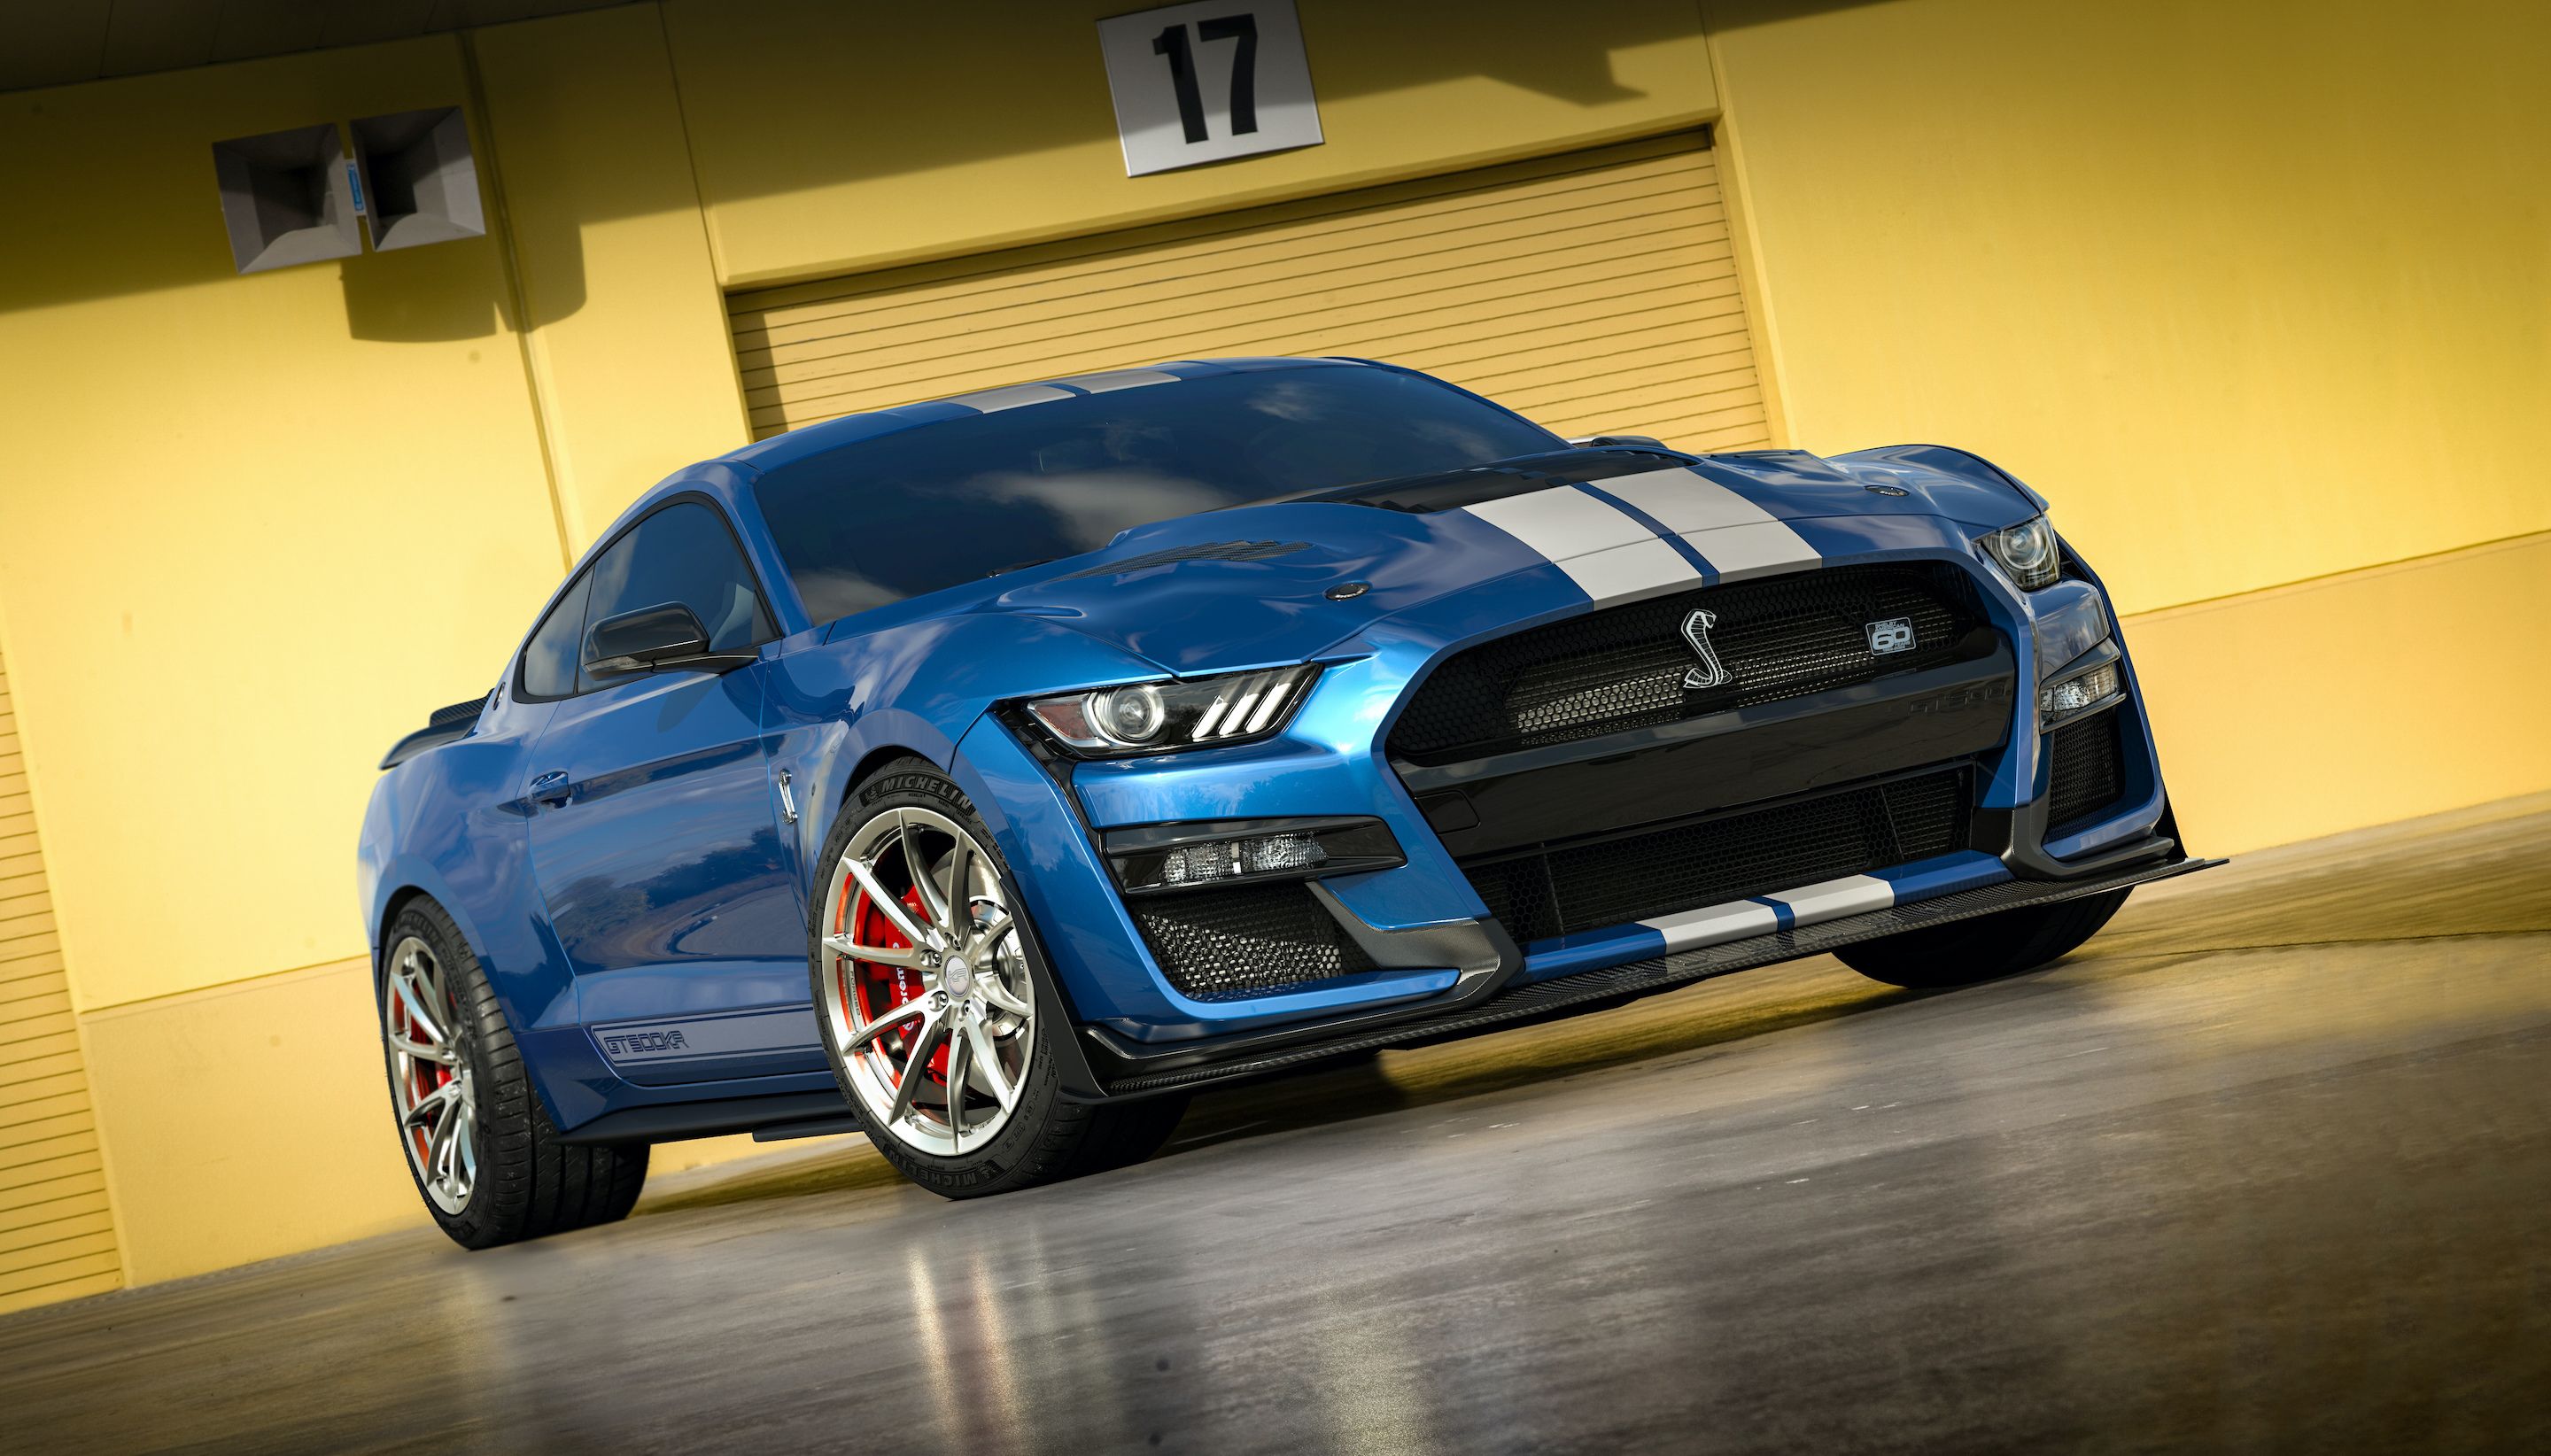 900+-HP Ford Mustang Shelby GT500KR Is for Shelby American's 60th